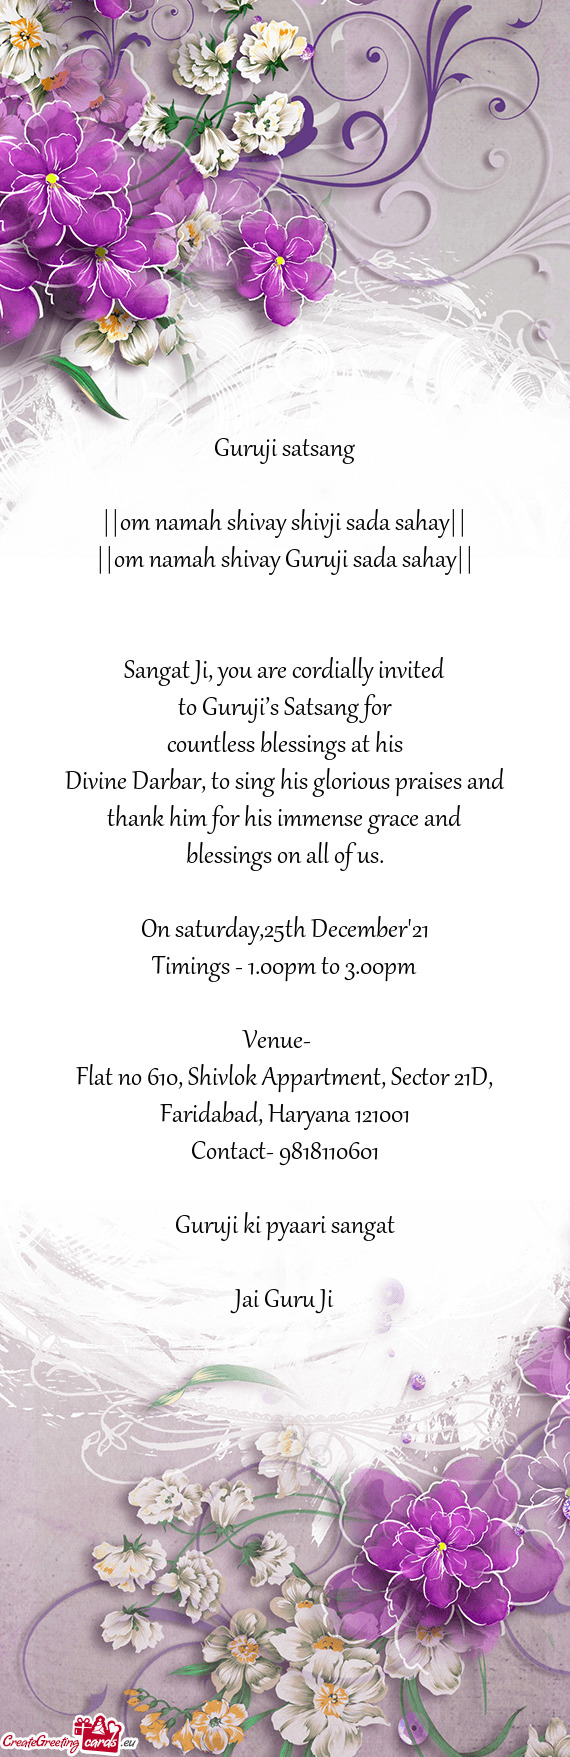 Divine Darbar, to sing his glorious praises and